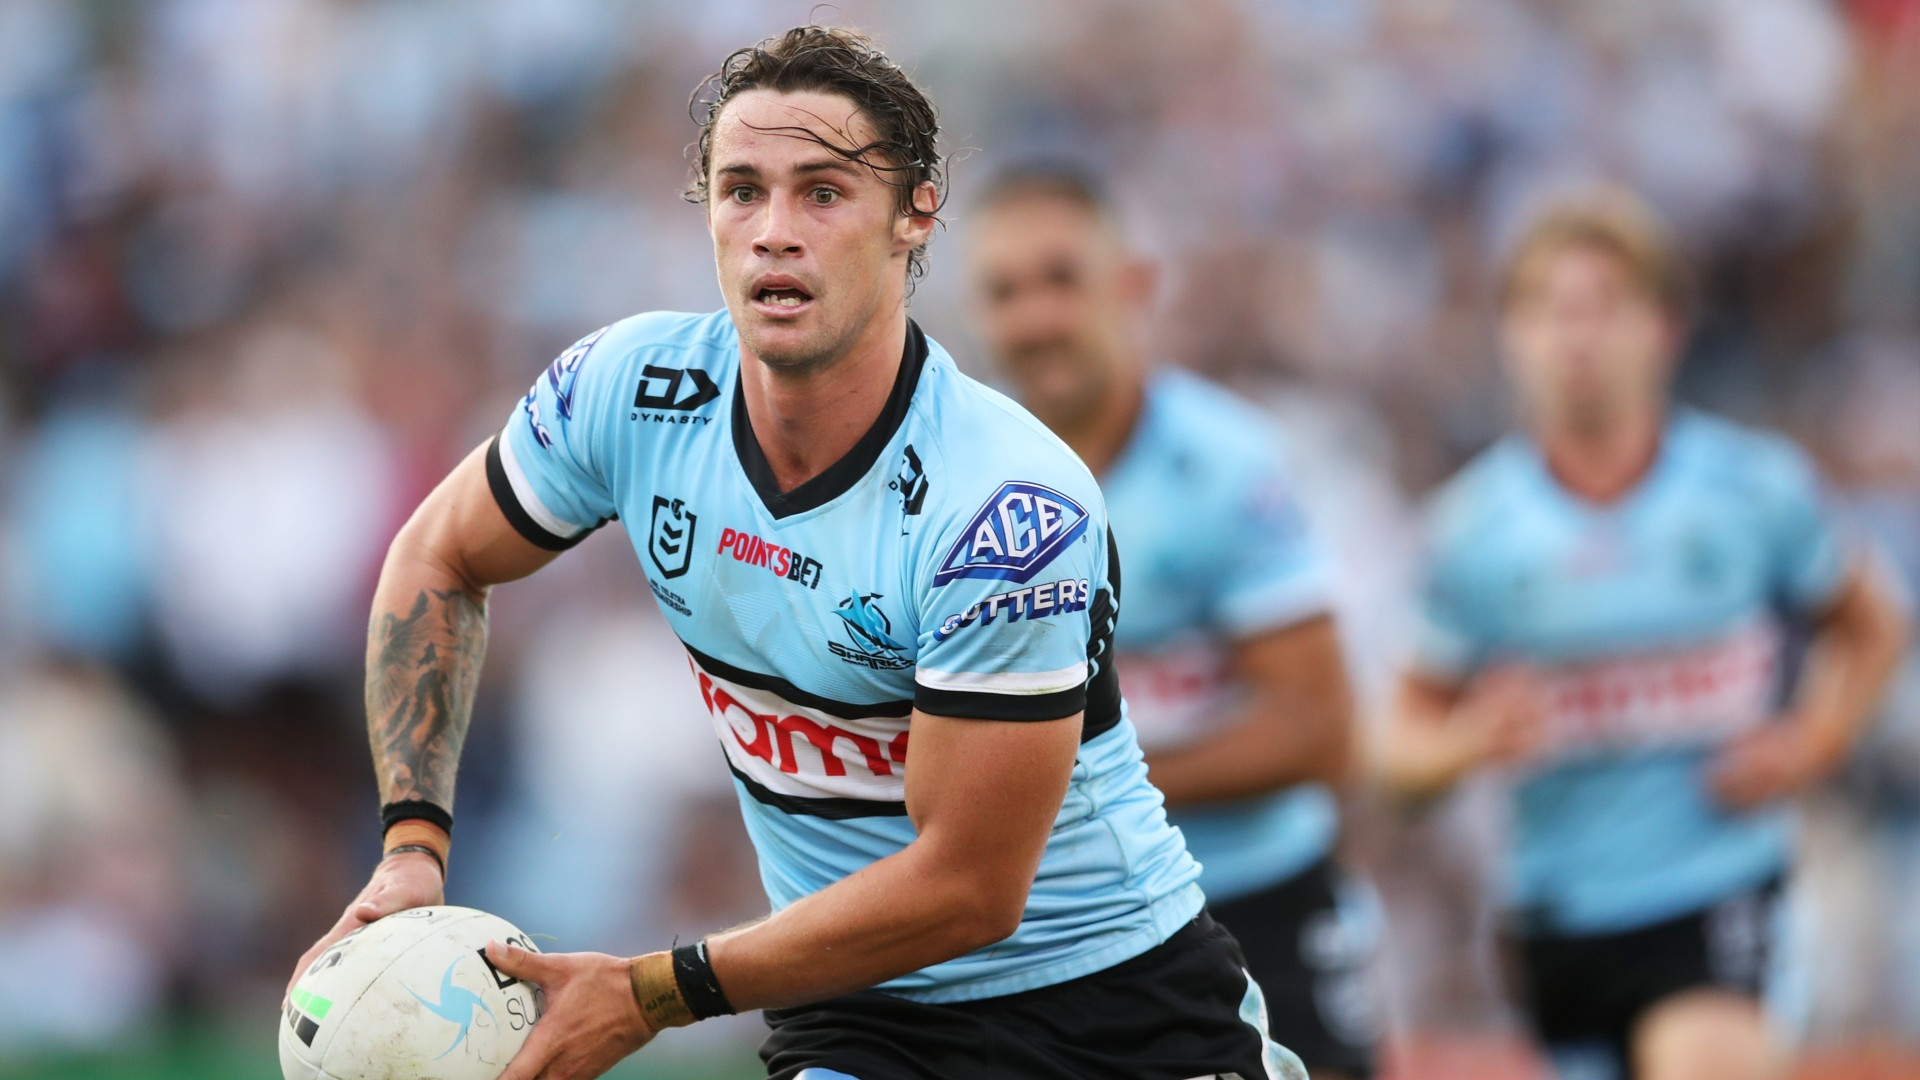 King of Cronulla: Sharks move to lock superstar Hynes in for life